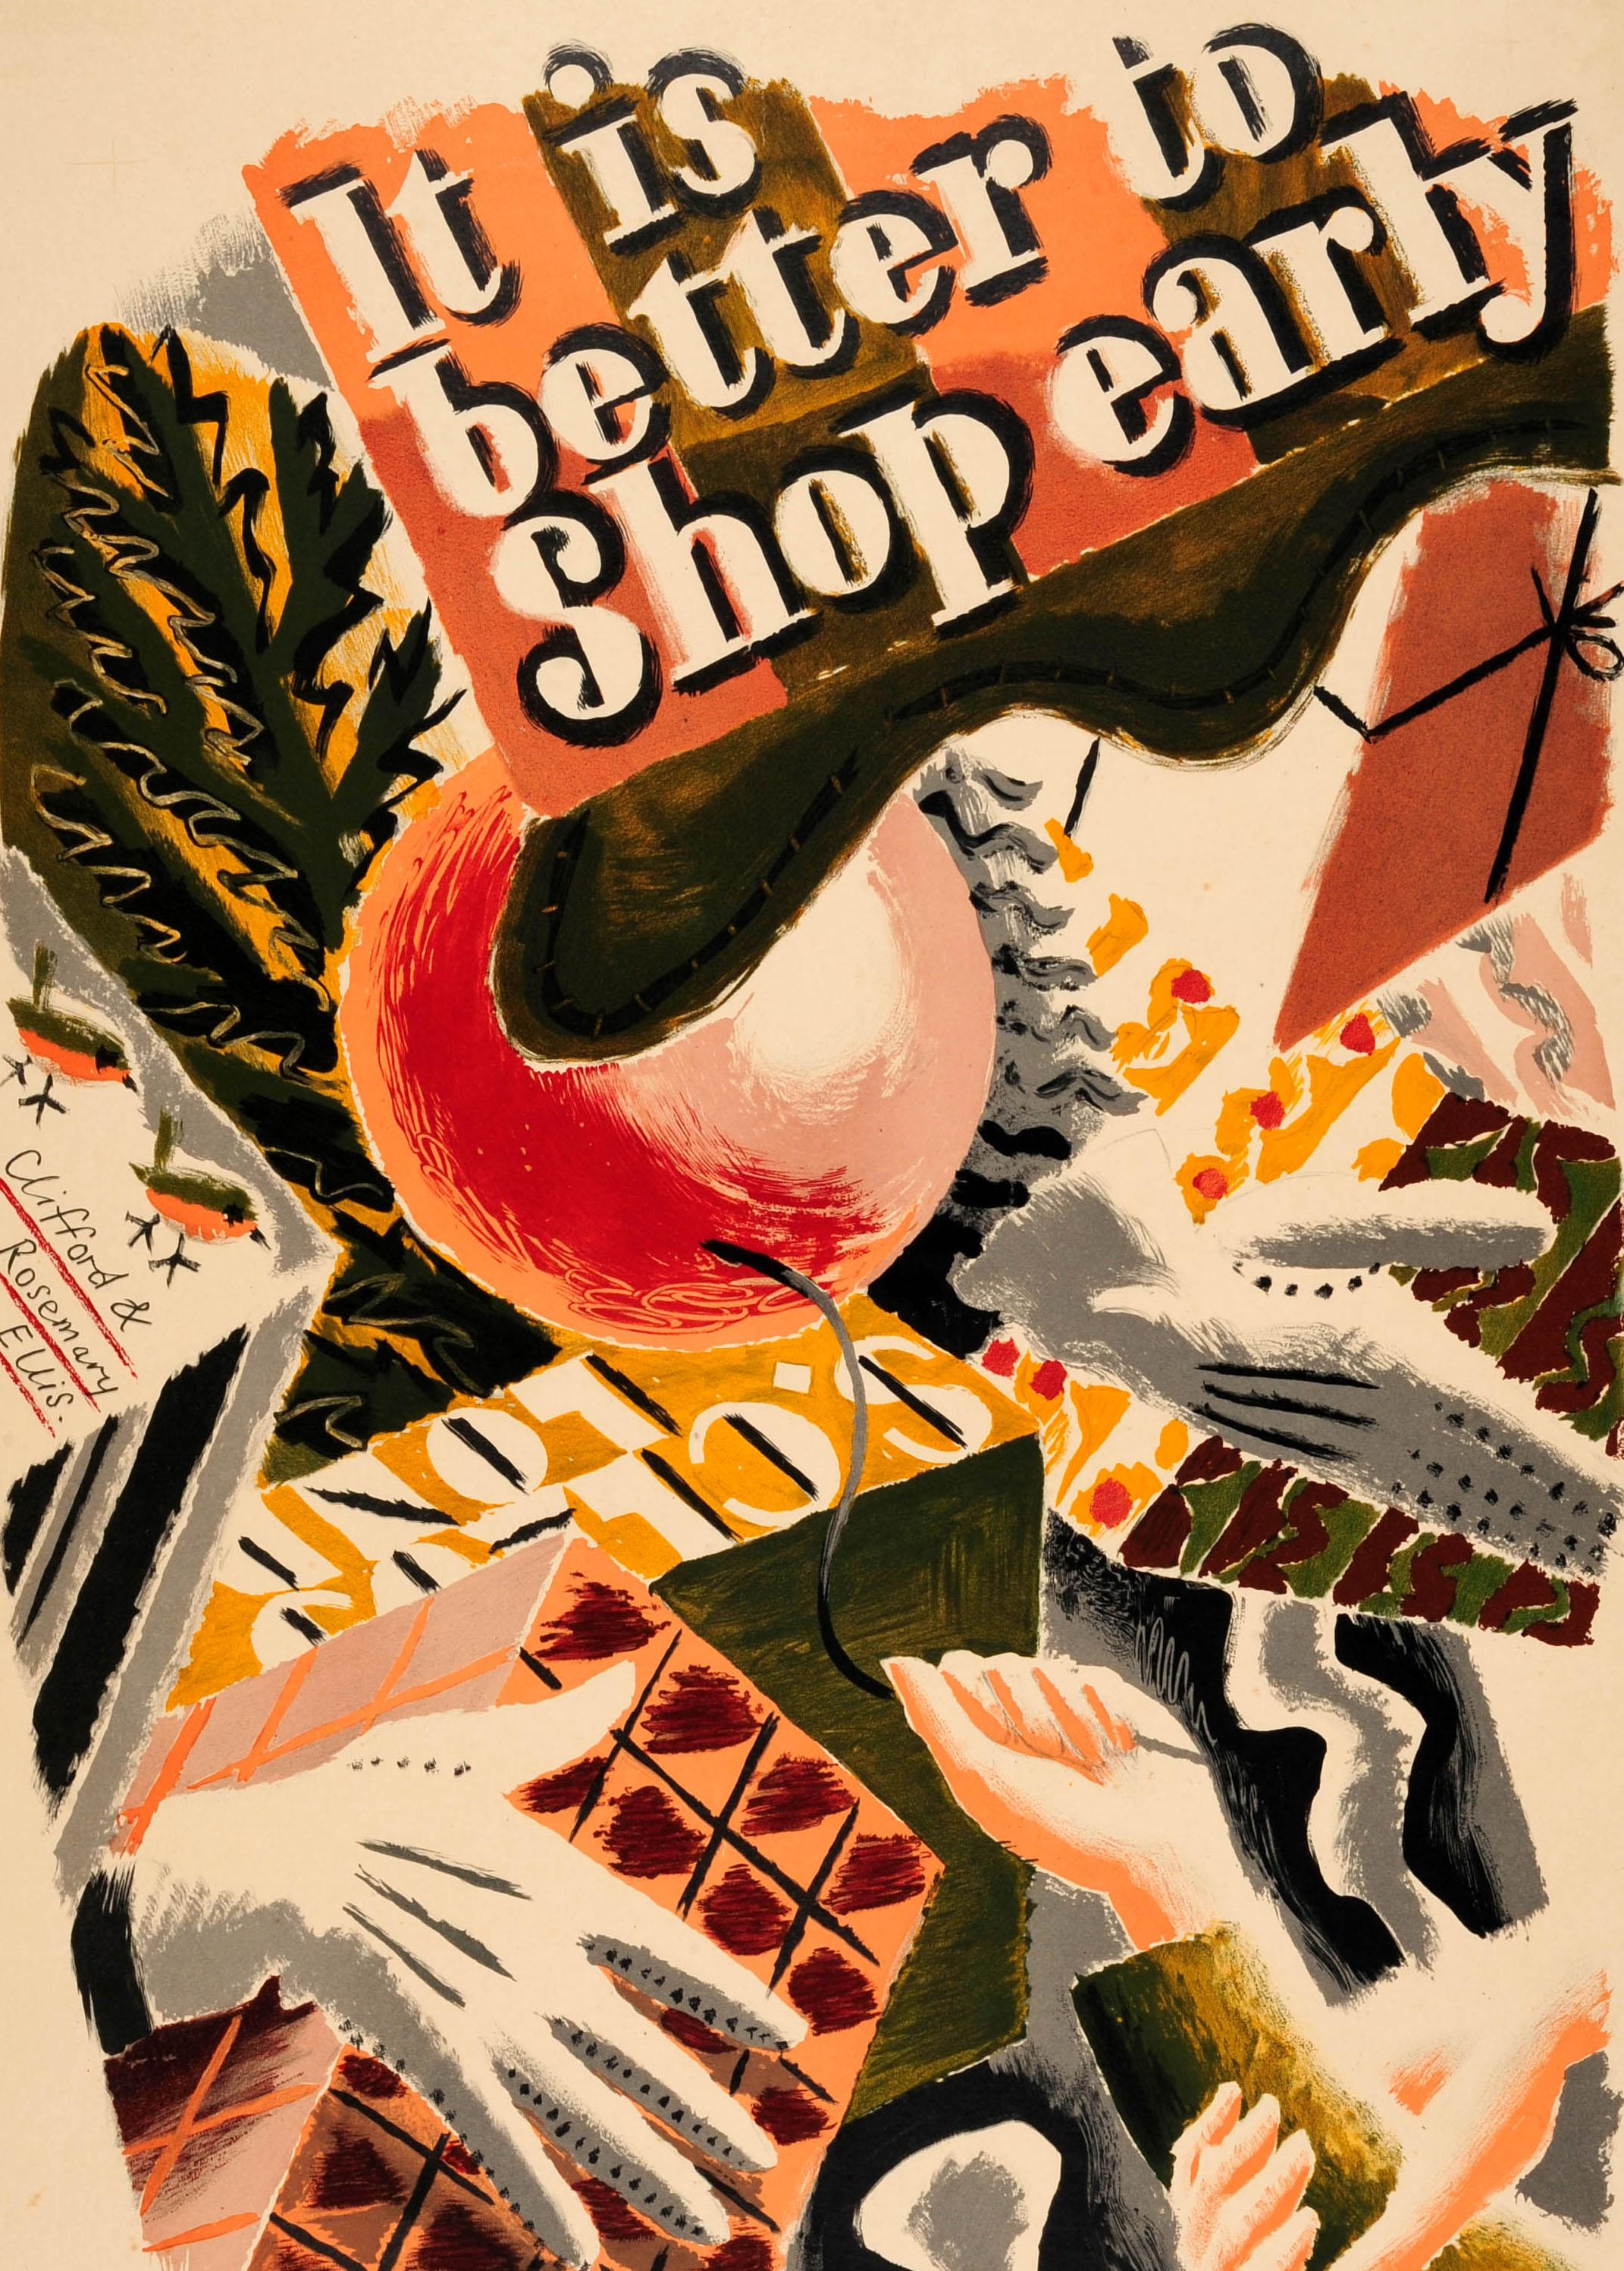 Original vintage poster issued by the London Passenger Transport Board - It is better to Shop early Early in the month - by the notable British graphic artist, printmaker and art teacher Clifford Ellis (1907-1985) and his wife Rosemary Ellis